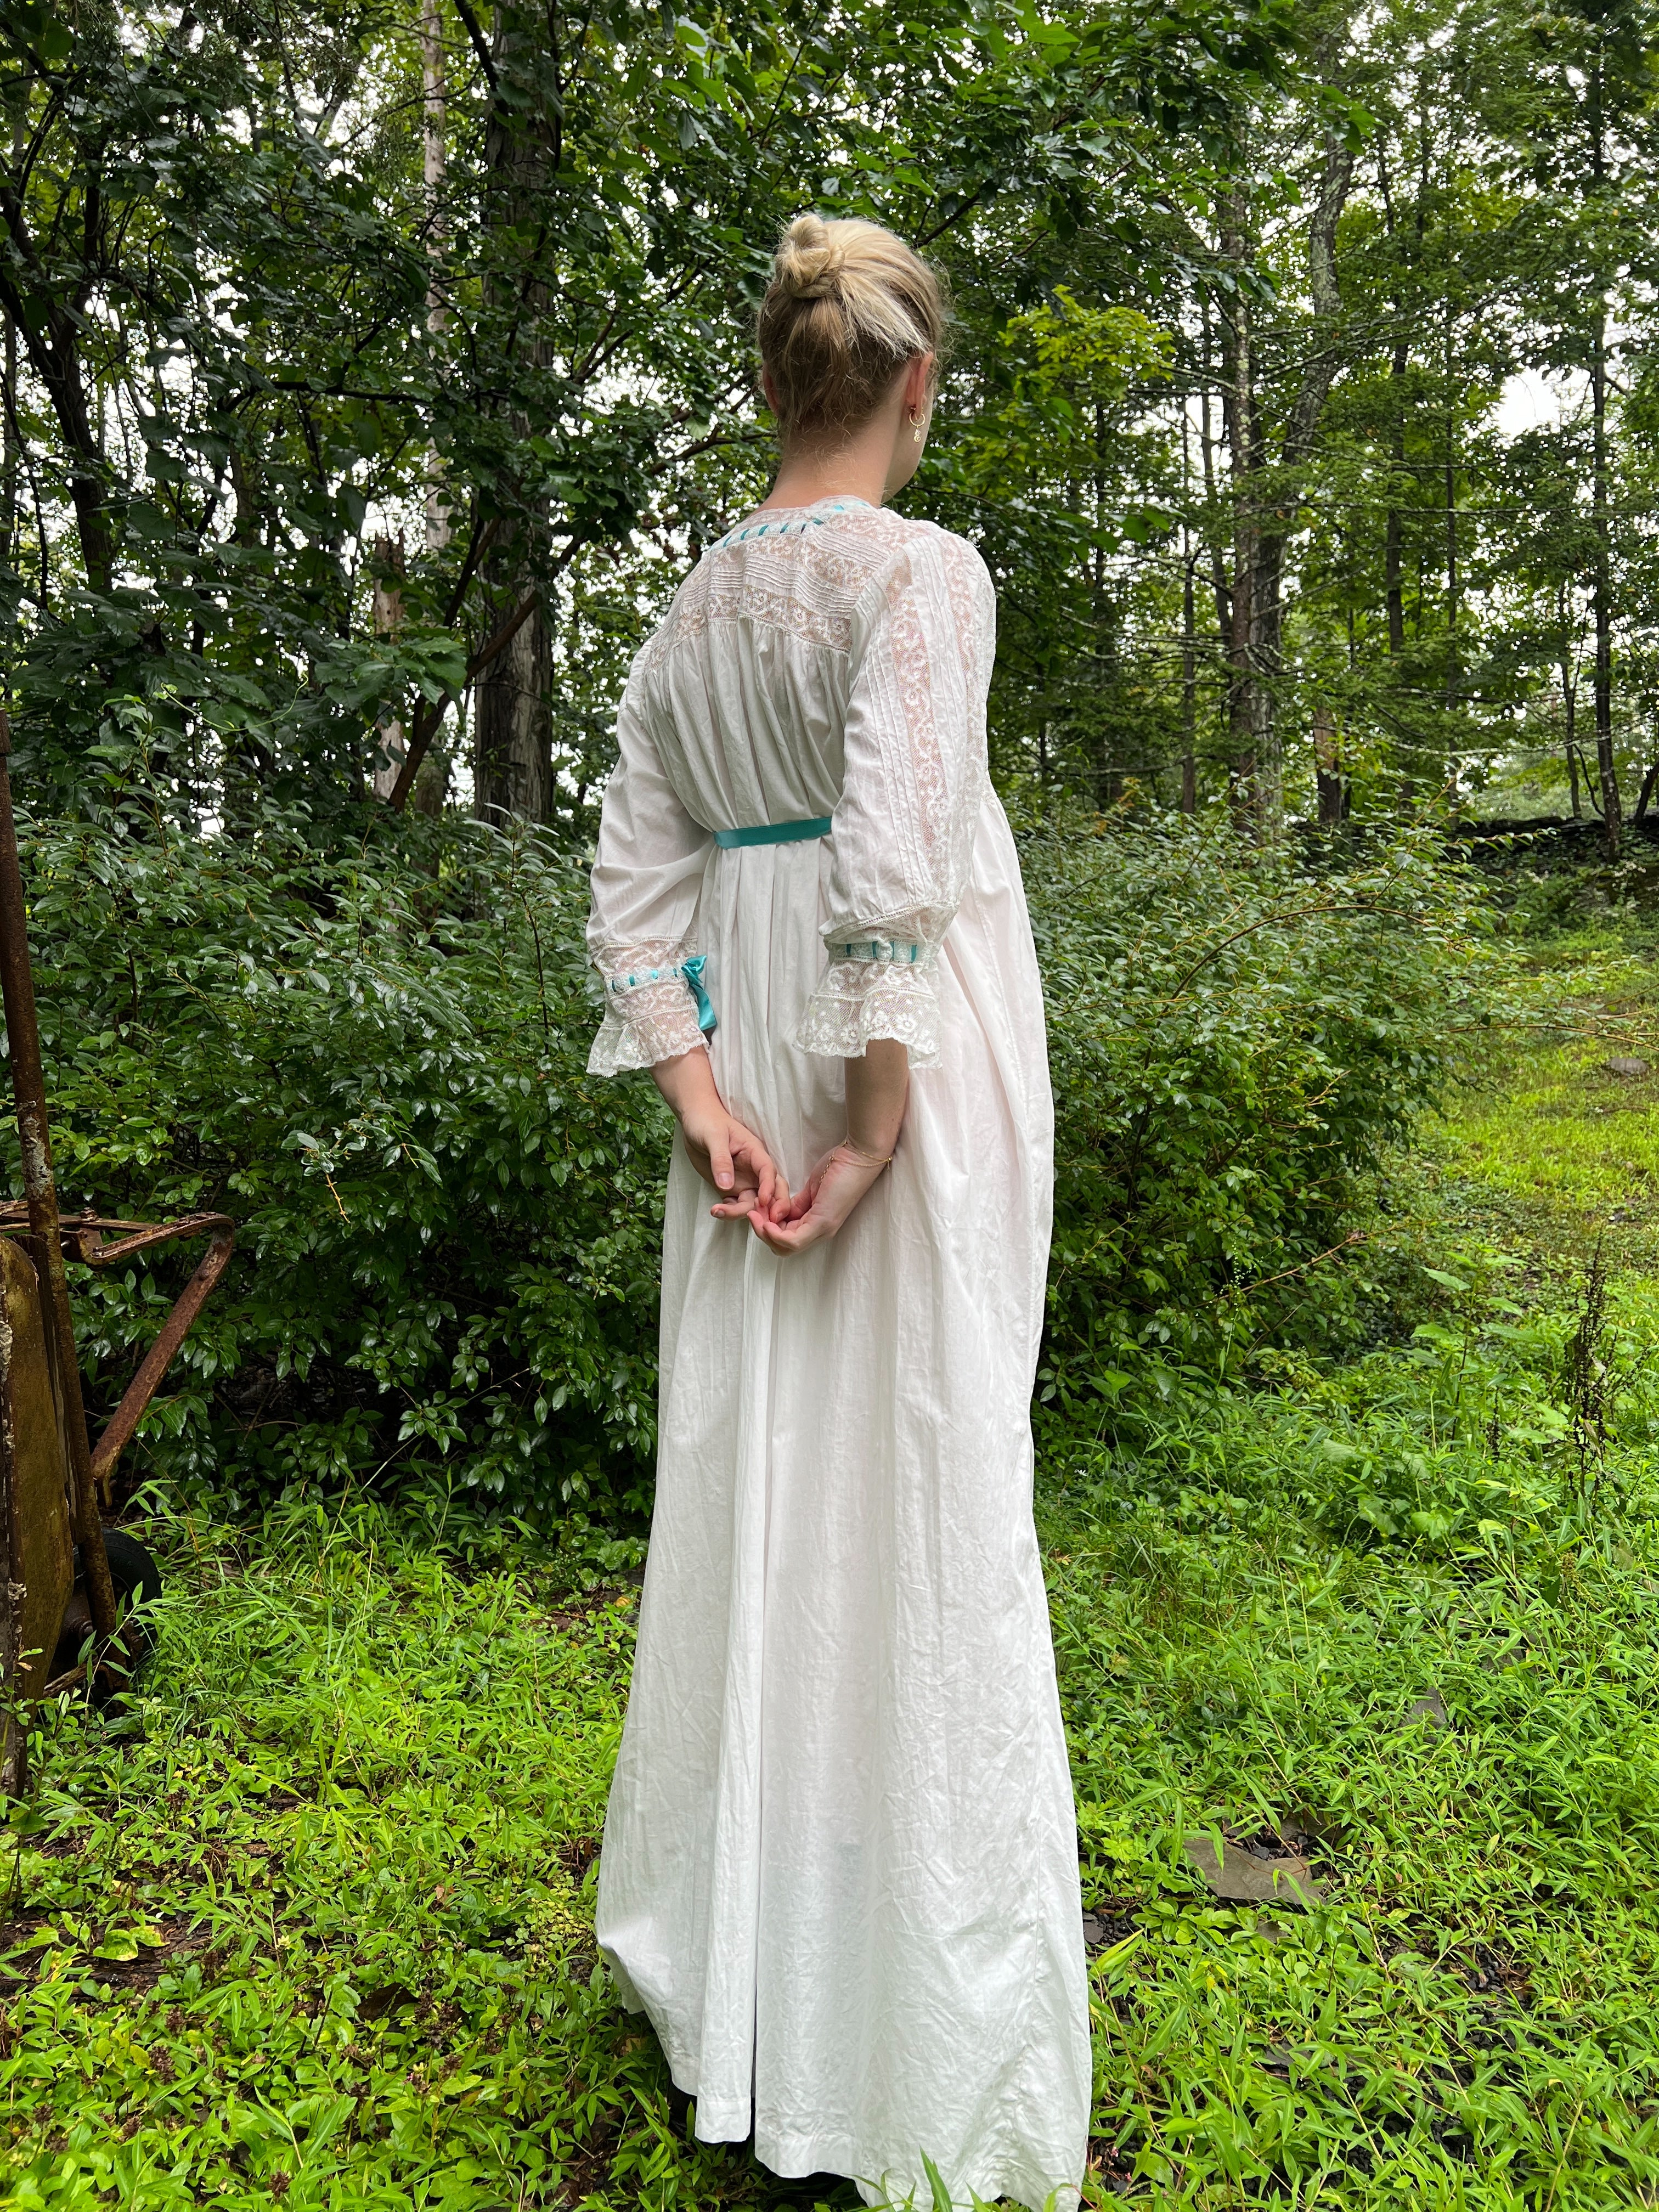 Edwardian White Cotton Dress with Blue Ribbon and Lace